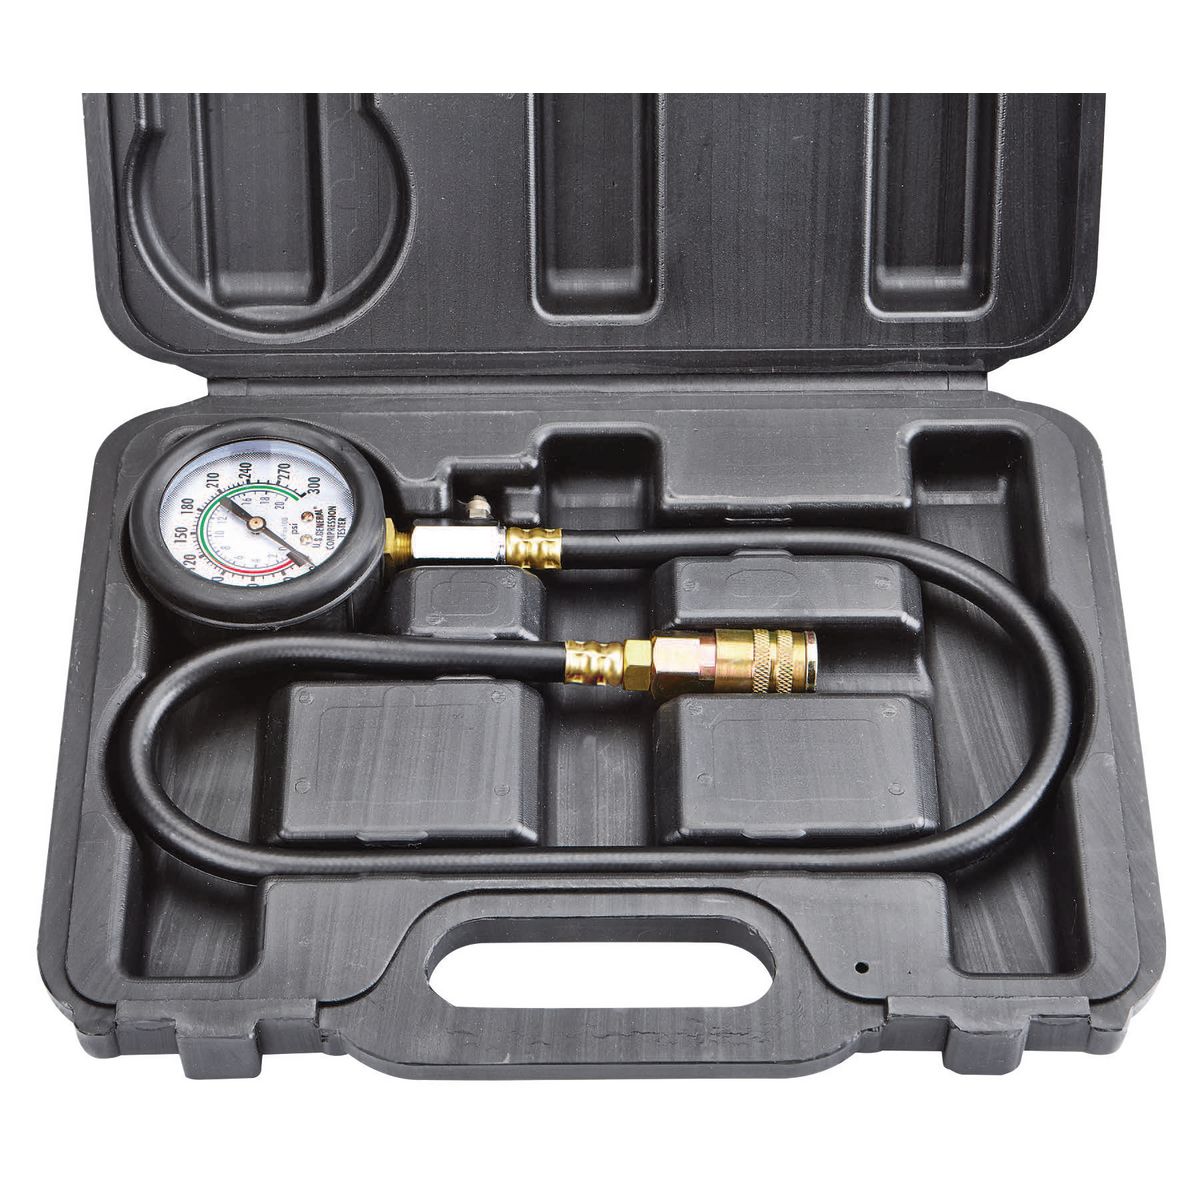 PITTSBURGH AUTOMOTIVE Quick-Connect Compression Tester - Item 62622 / 95187